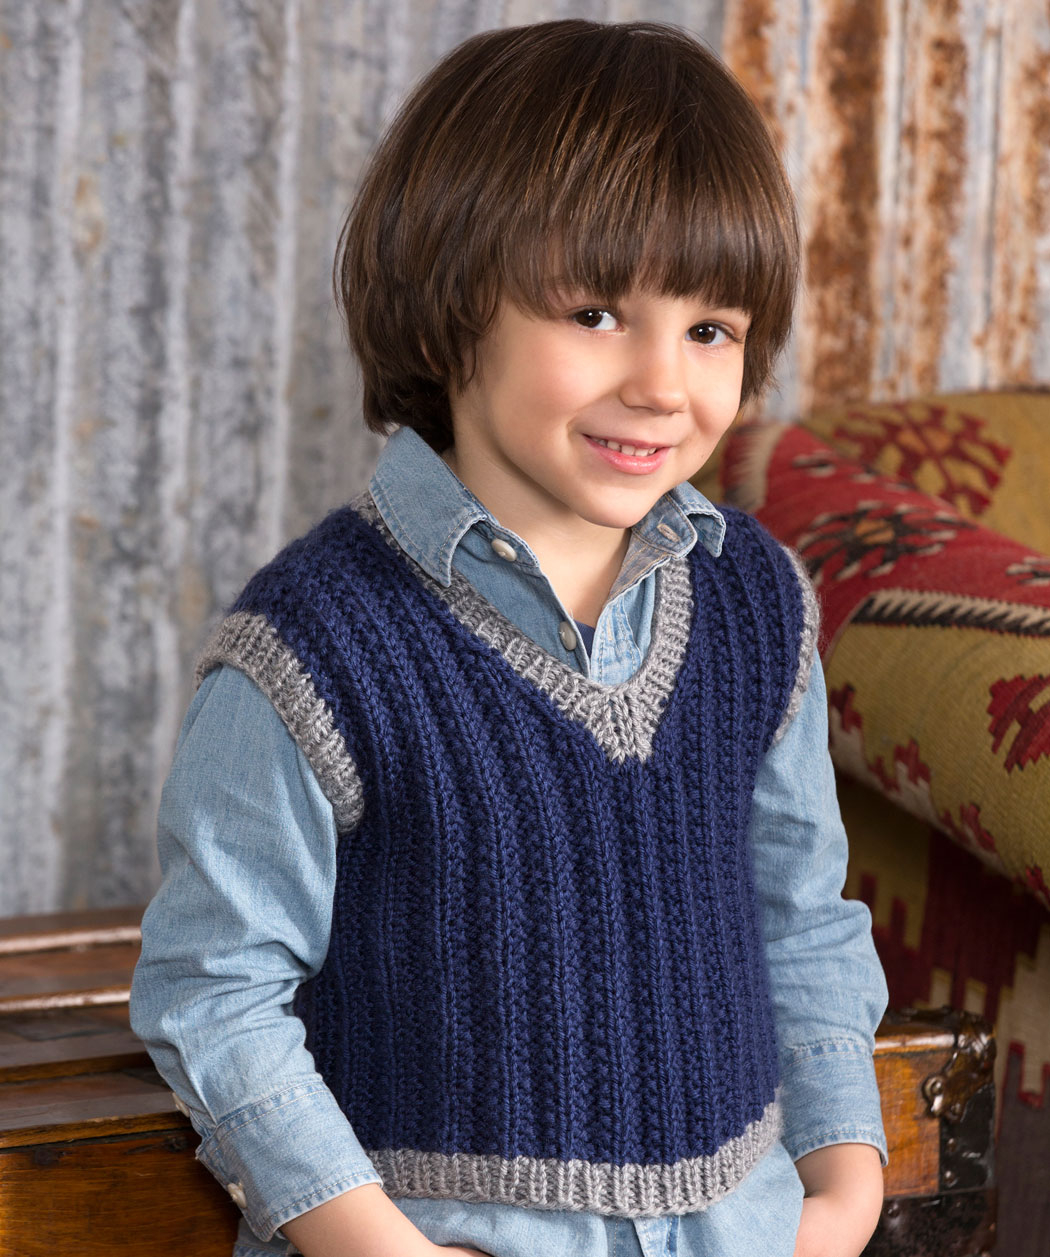 Crochet Sweater Vest Pattern Free 57 Knit And Crochet Patterns For Boys Red Heart Blog